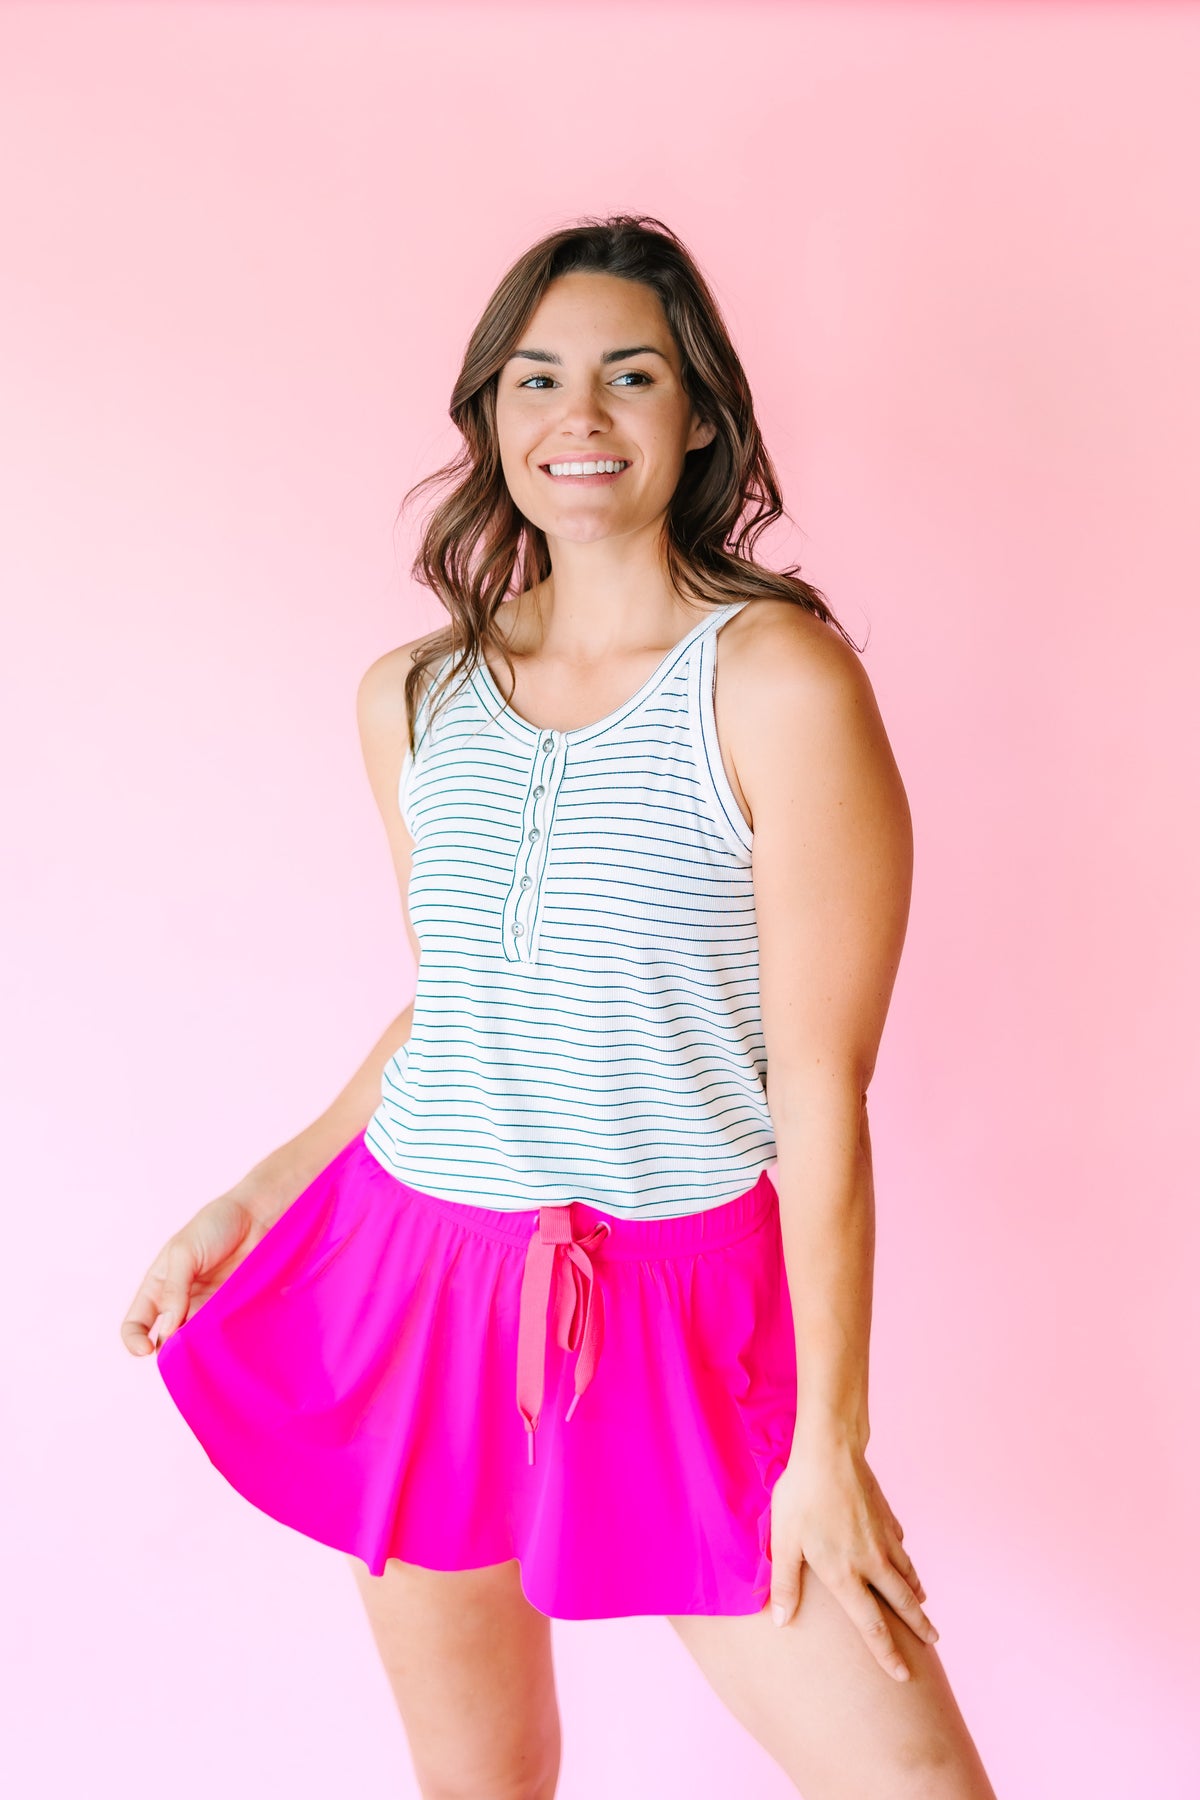 Neon Pink Athletic Skirt